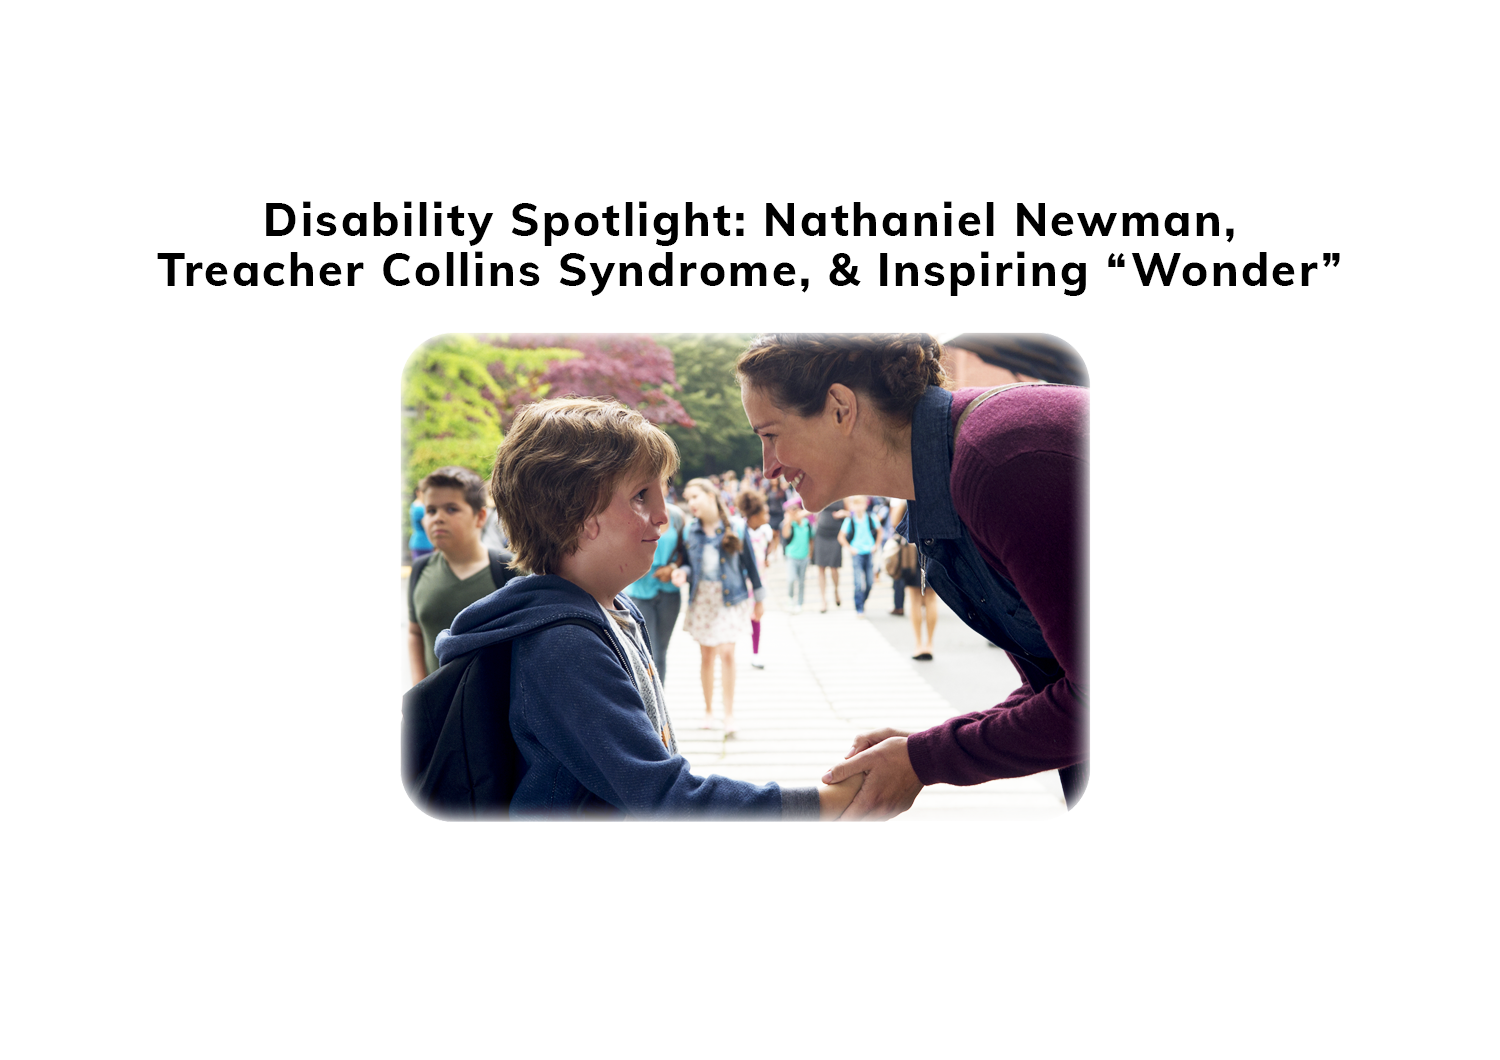 Wonder: A Disability spotlight about Nathaniel Newman, and inspiring the 2017 movie "Wonder"